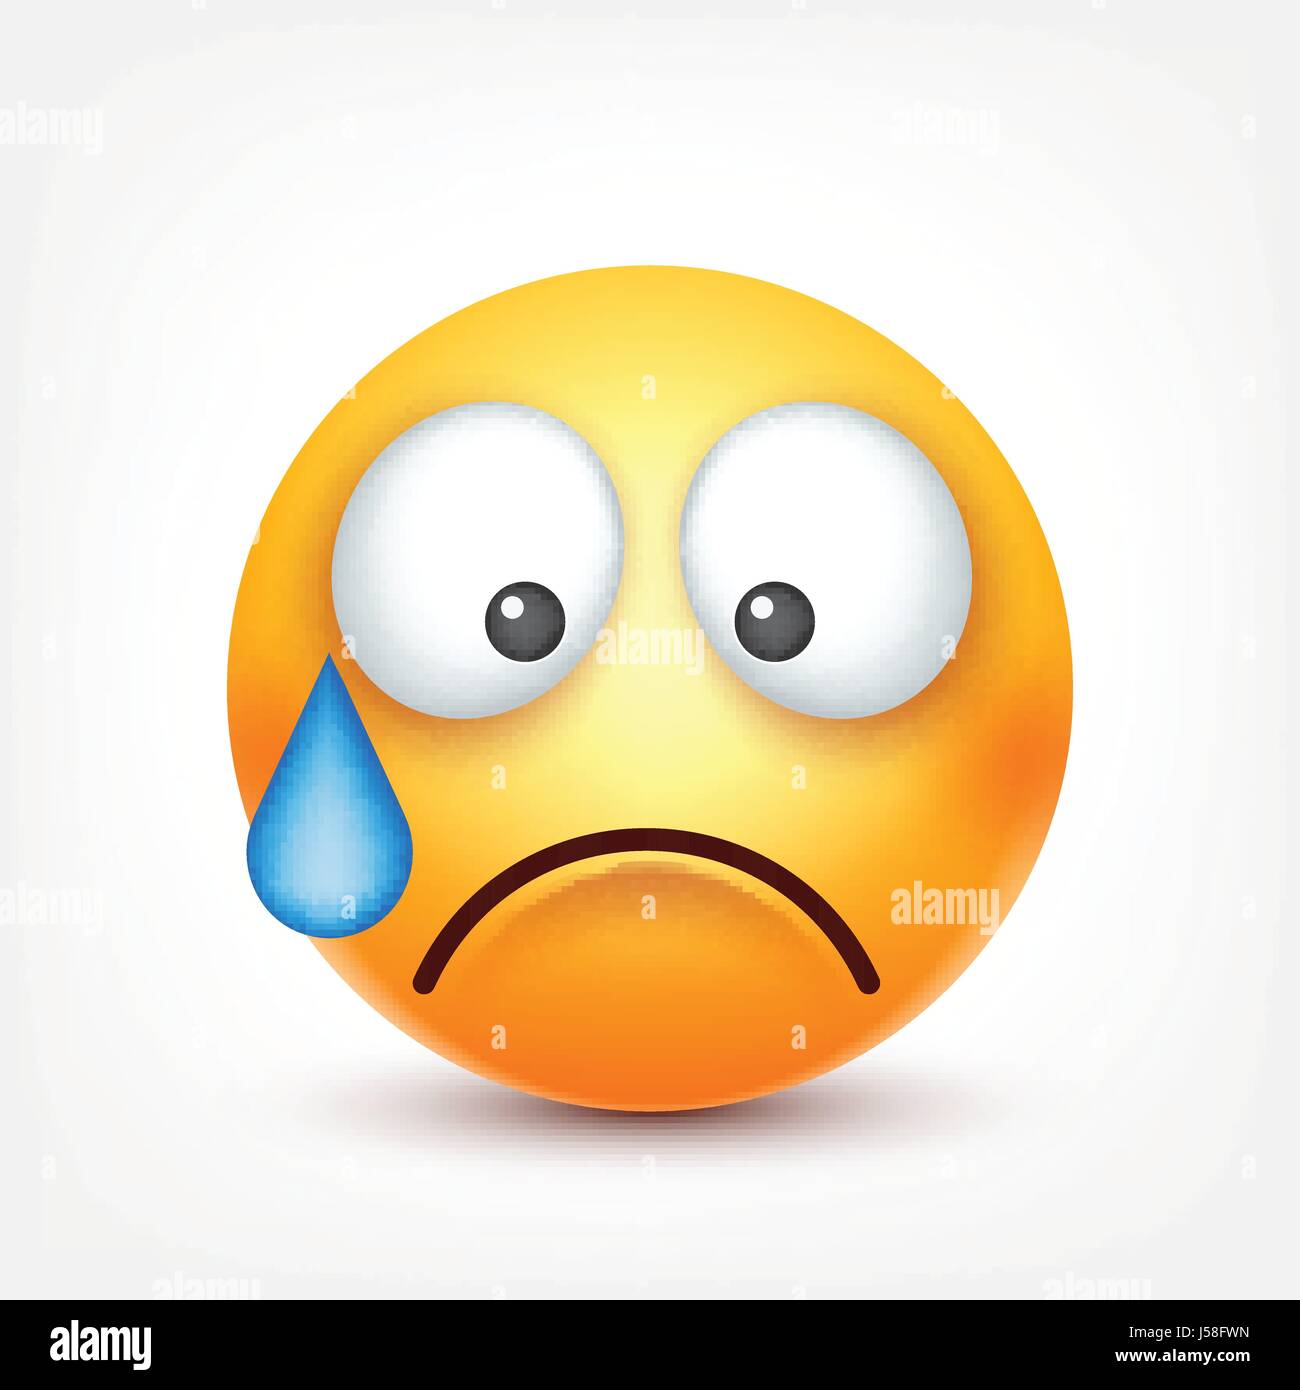 Emoji Disappearing Funny Meme Sad Screaming Angry Face | Poster